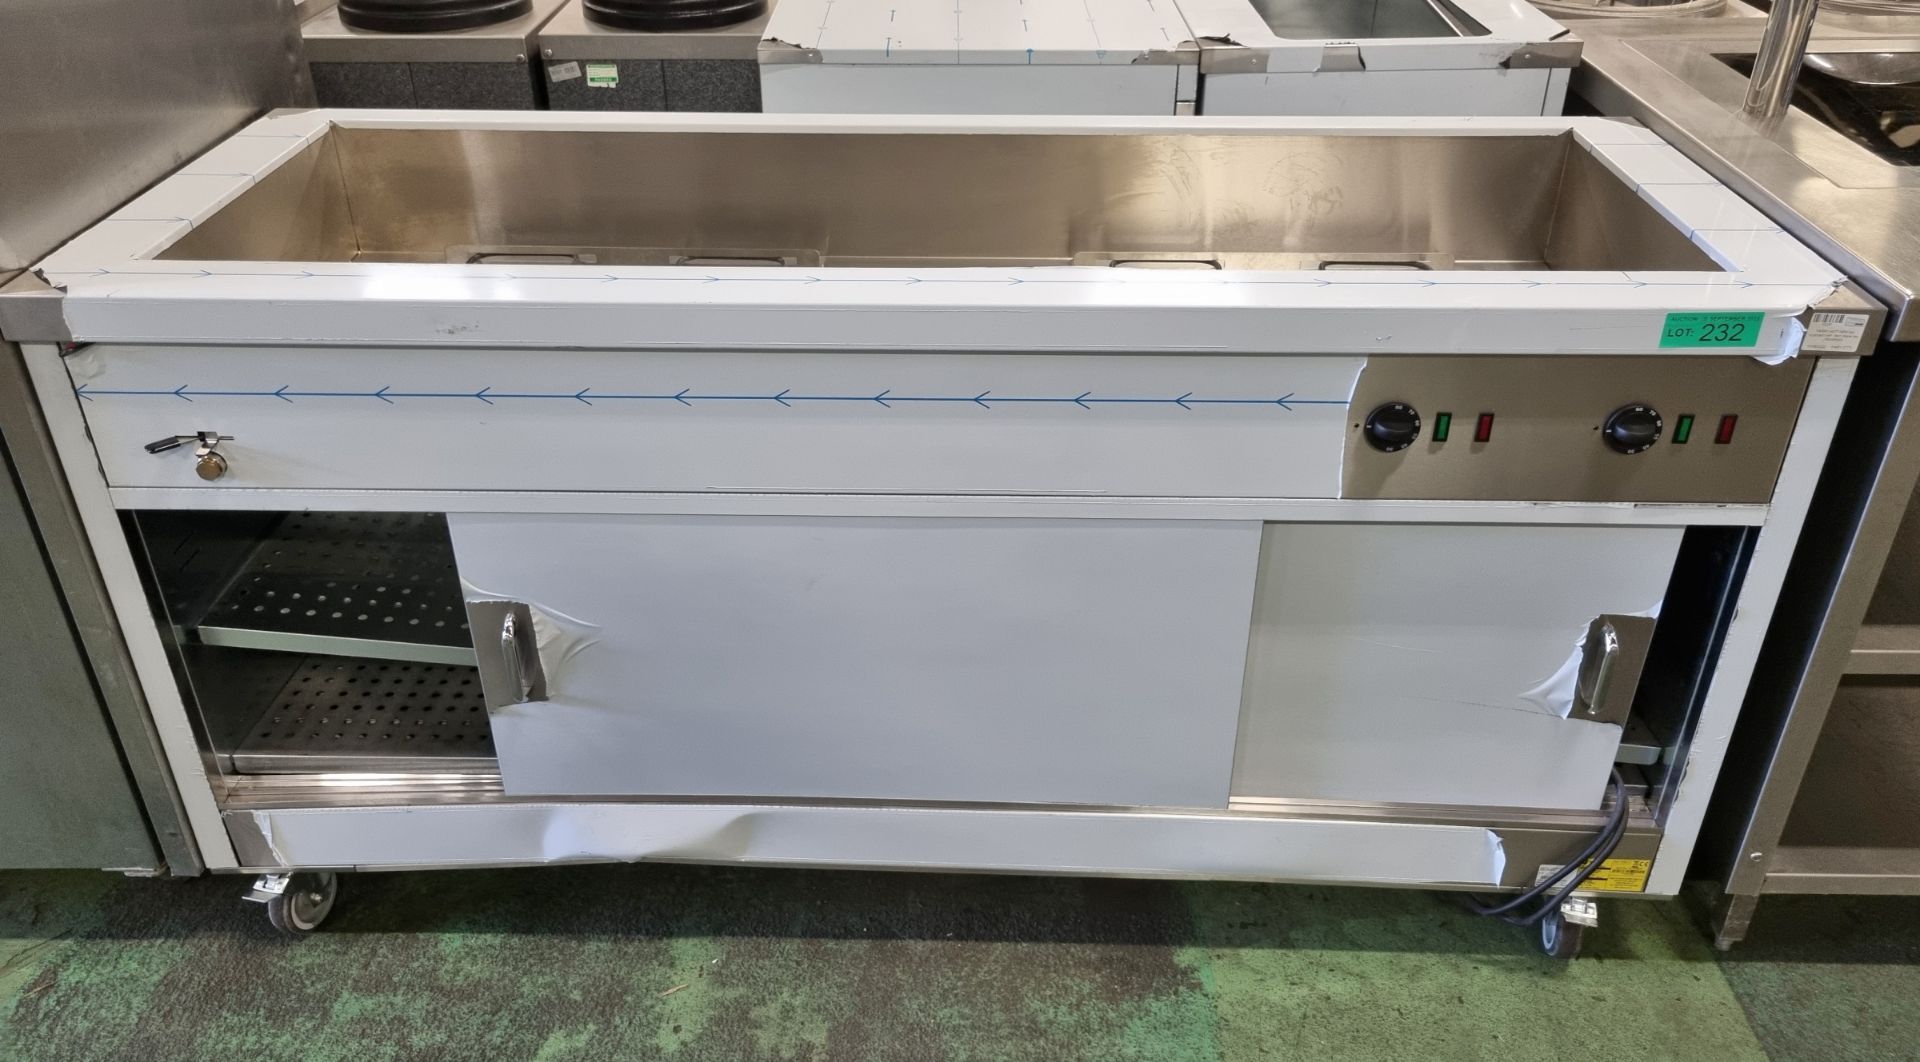 Parry HOT18BM hot cupboard with bain marie top - 180 x 65 x 90